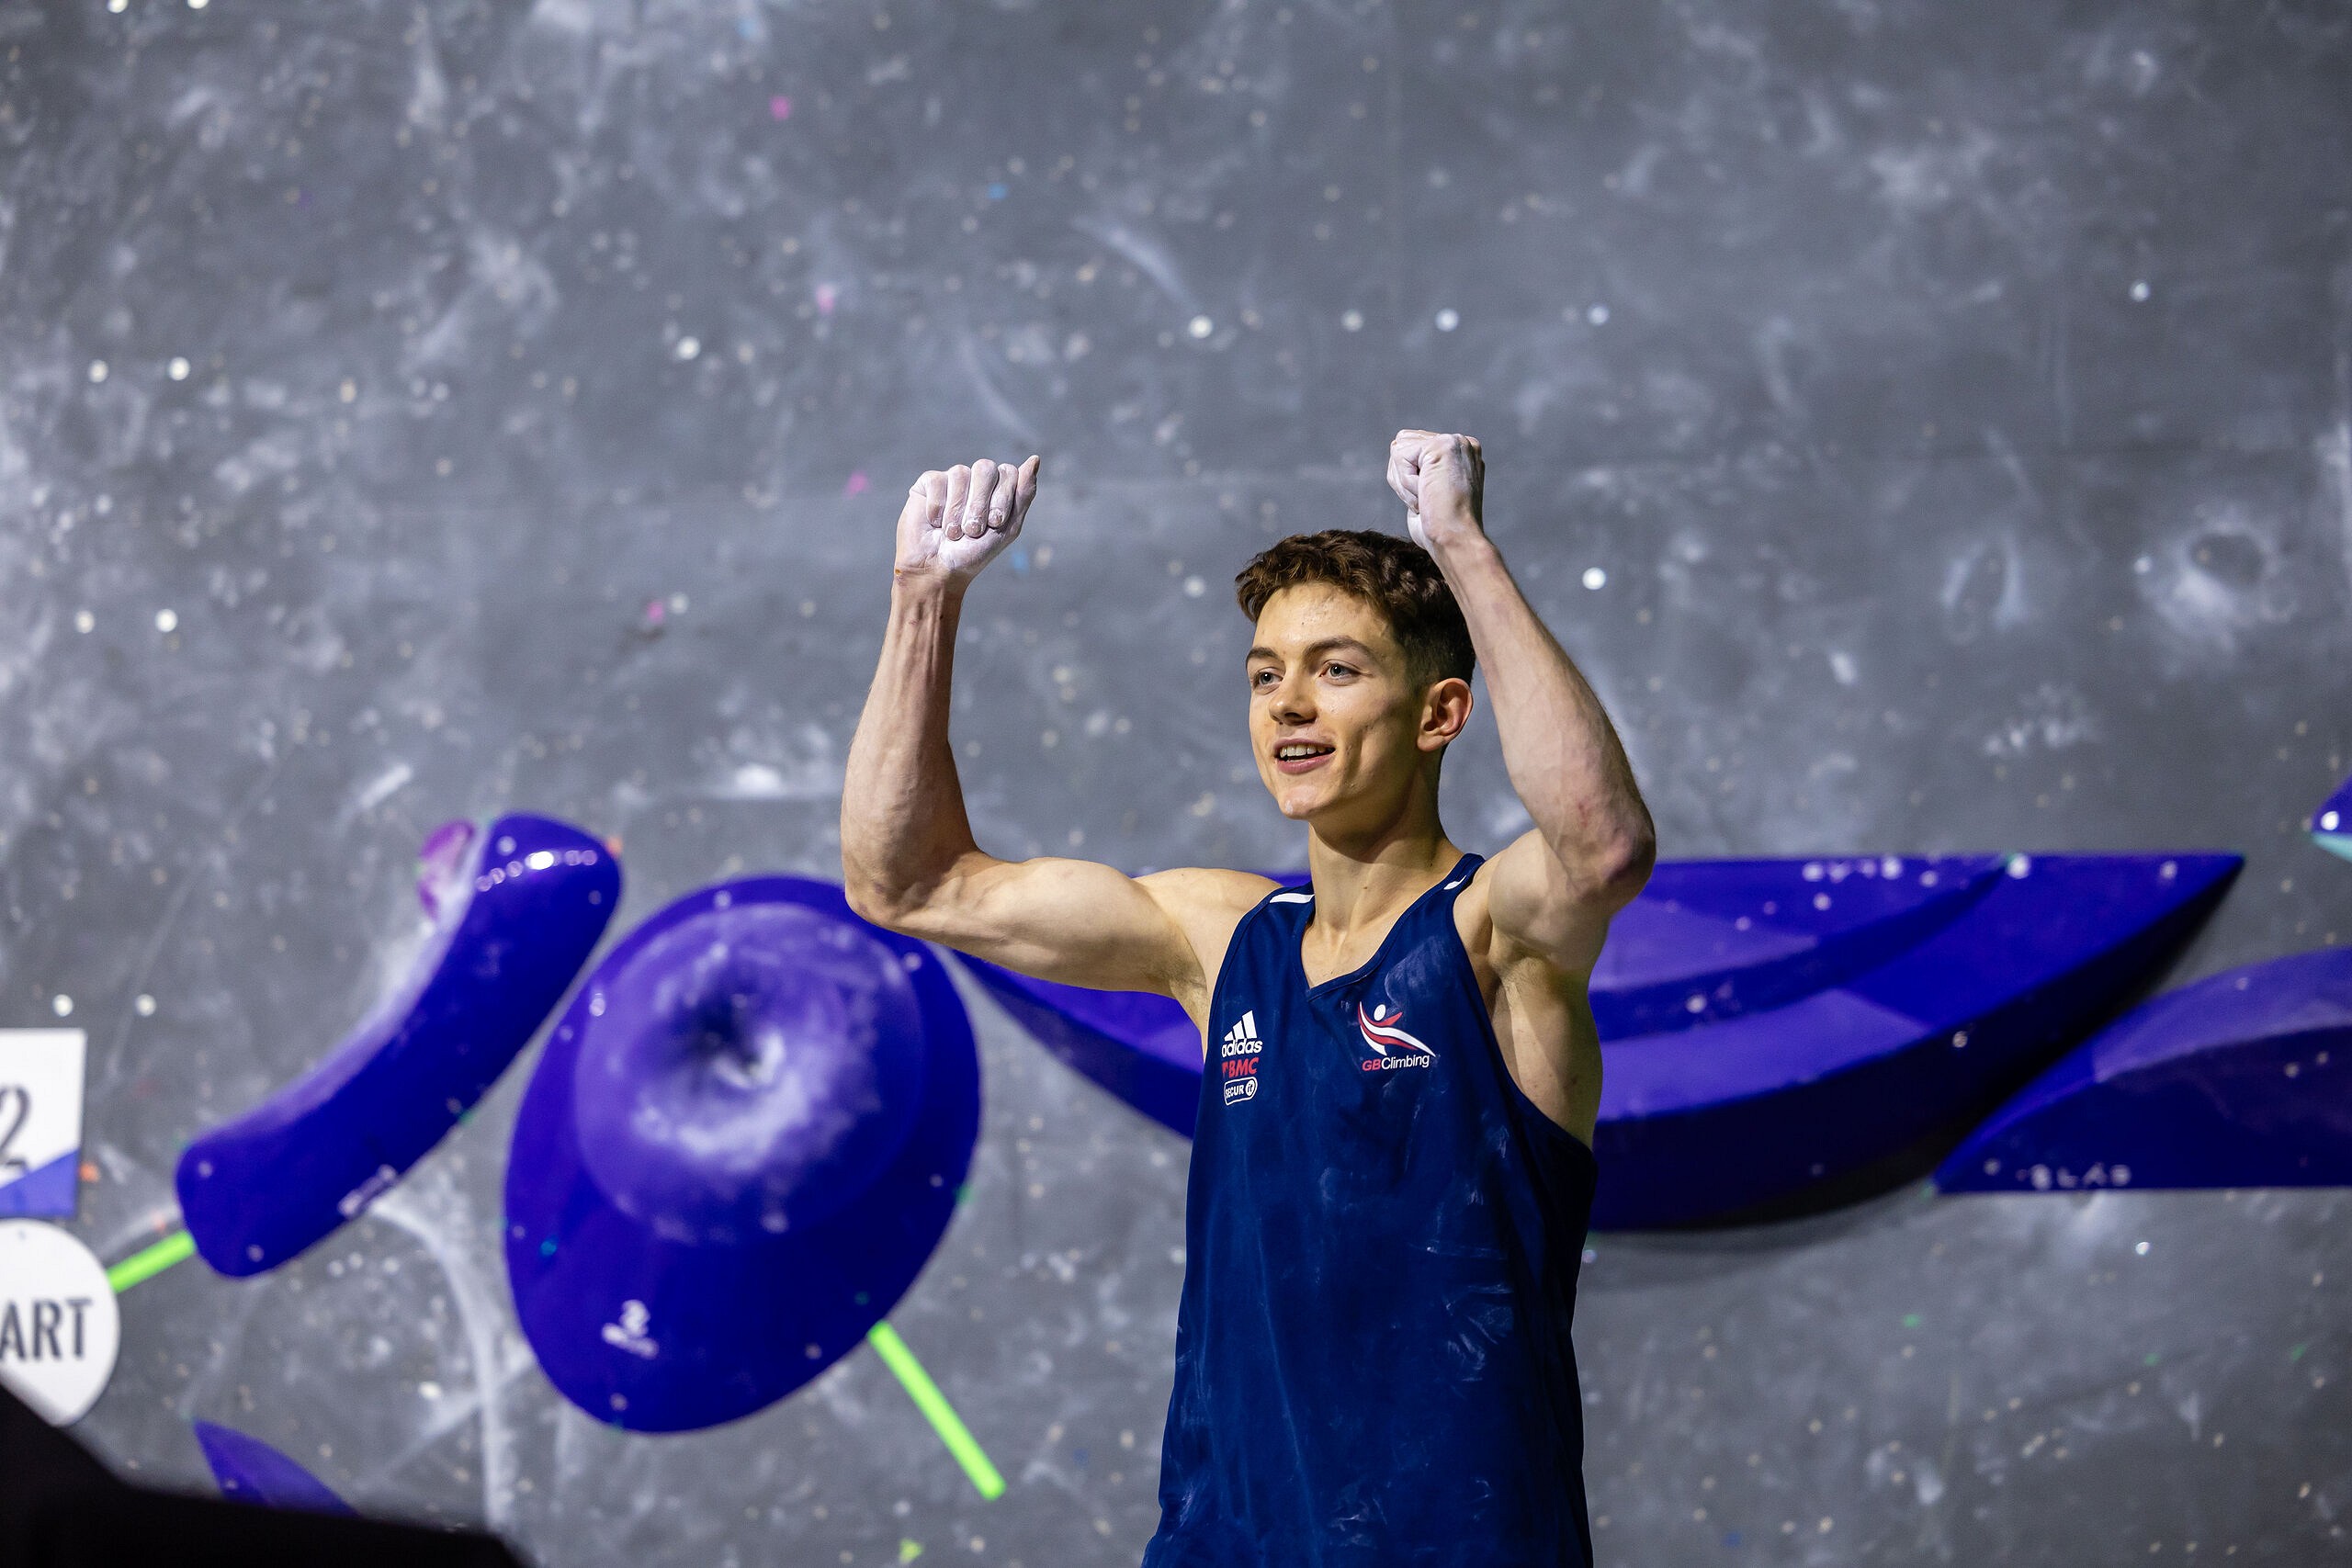 Toby Roberts celebrates a Top in the Boulder round.  © Jan Virt/IFSC